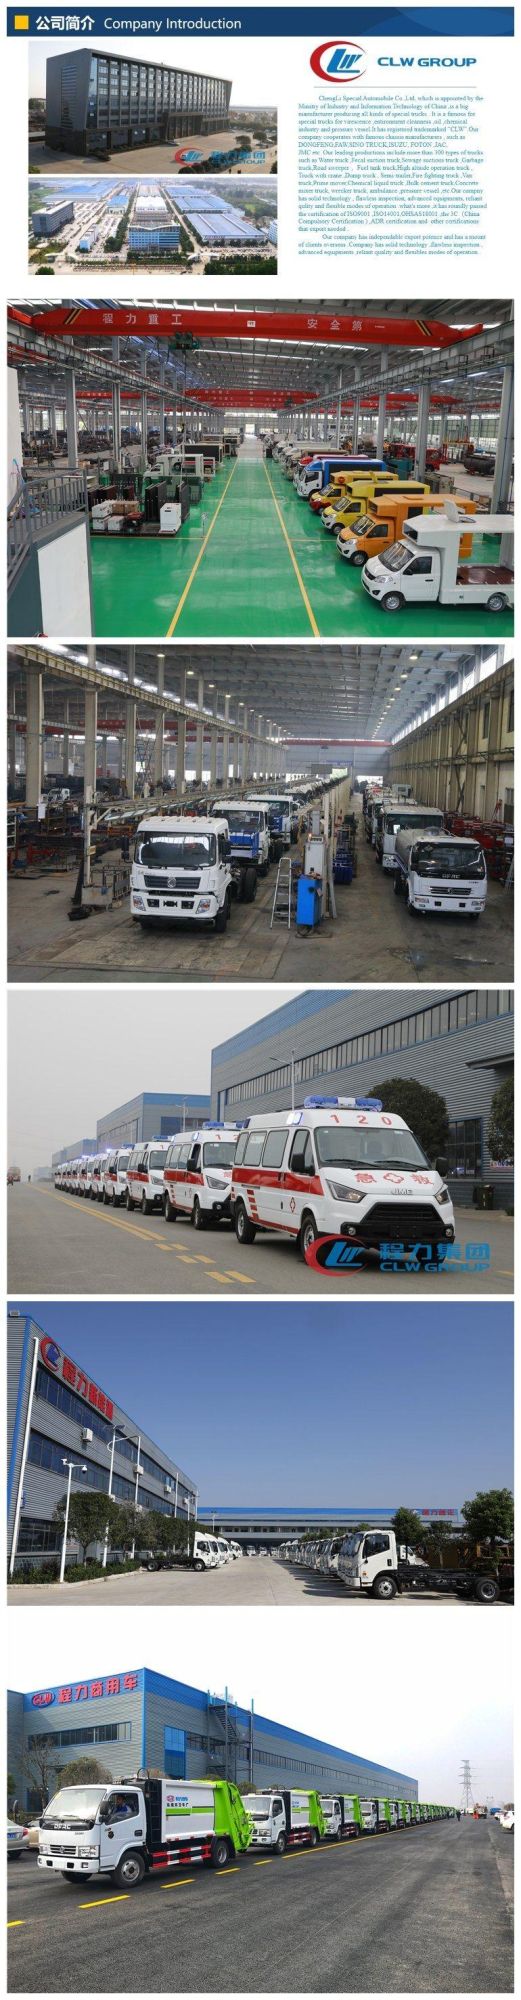 4*2 Dongfeng Tianjin High-Top Two-Bedroom Refrigerated Truck Factory Direct Sales, Freezer Truck